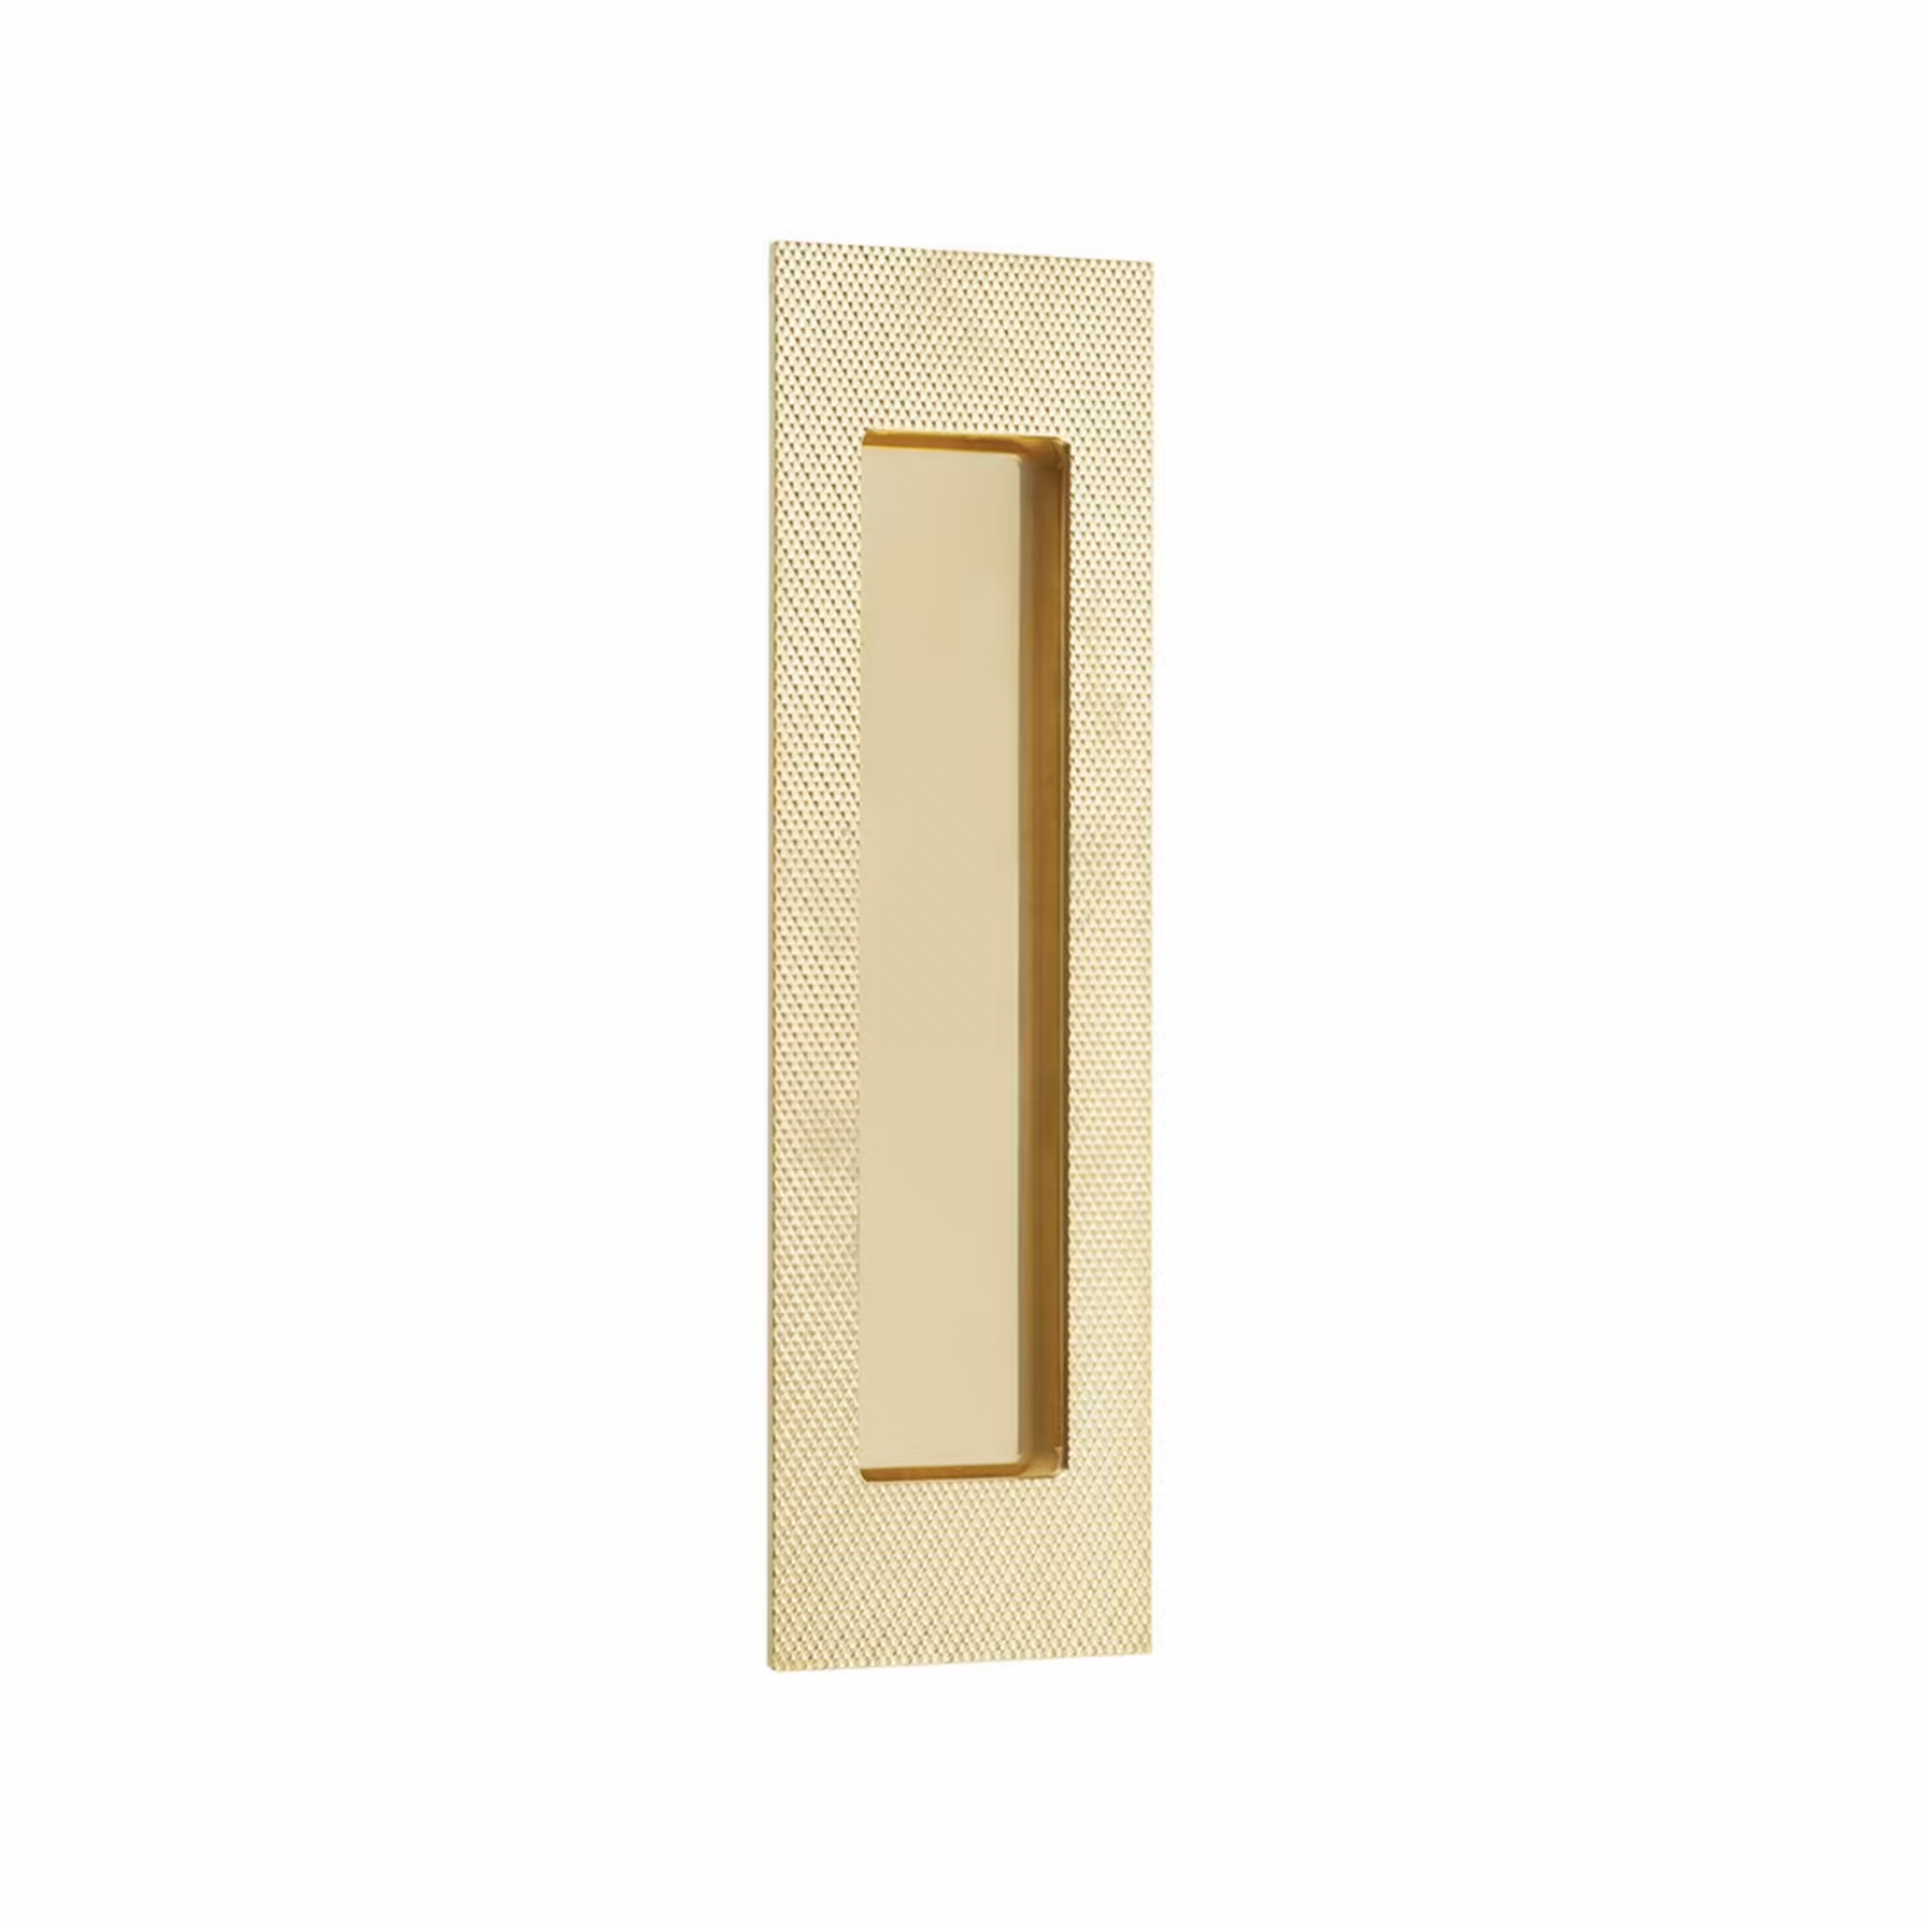 Knurled Modern Rectangular Recess Flush Door Pull in Unlacquered Polished Brass - Industry Hardware